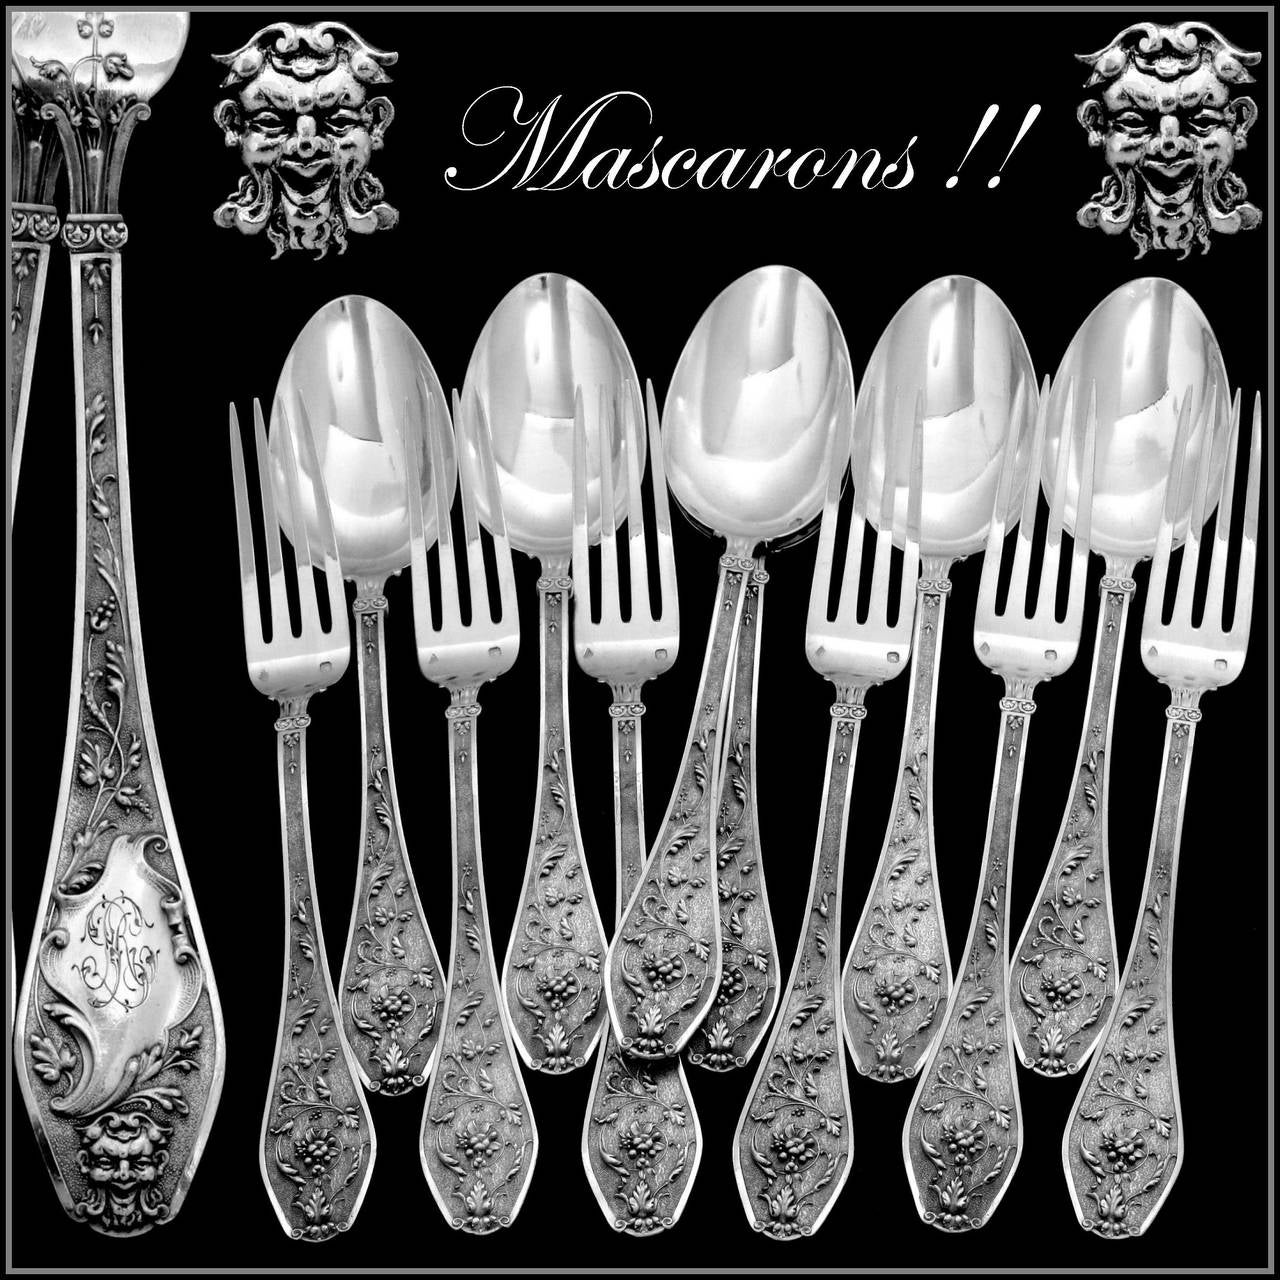 Incredible French Sterling Silver Dessert/Entremet Flatware Set 12 pc Mascaron

Head of Minerve 1 st titre for 950/1000 French Sterling Silver guarantee

Handles have fantastic decoration in the Renaissance style on a stippled backround on one